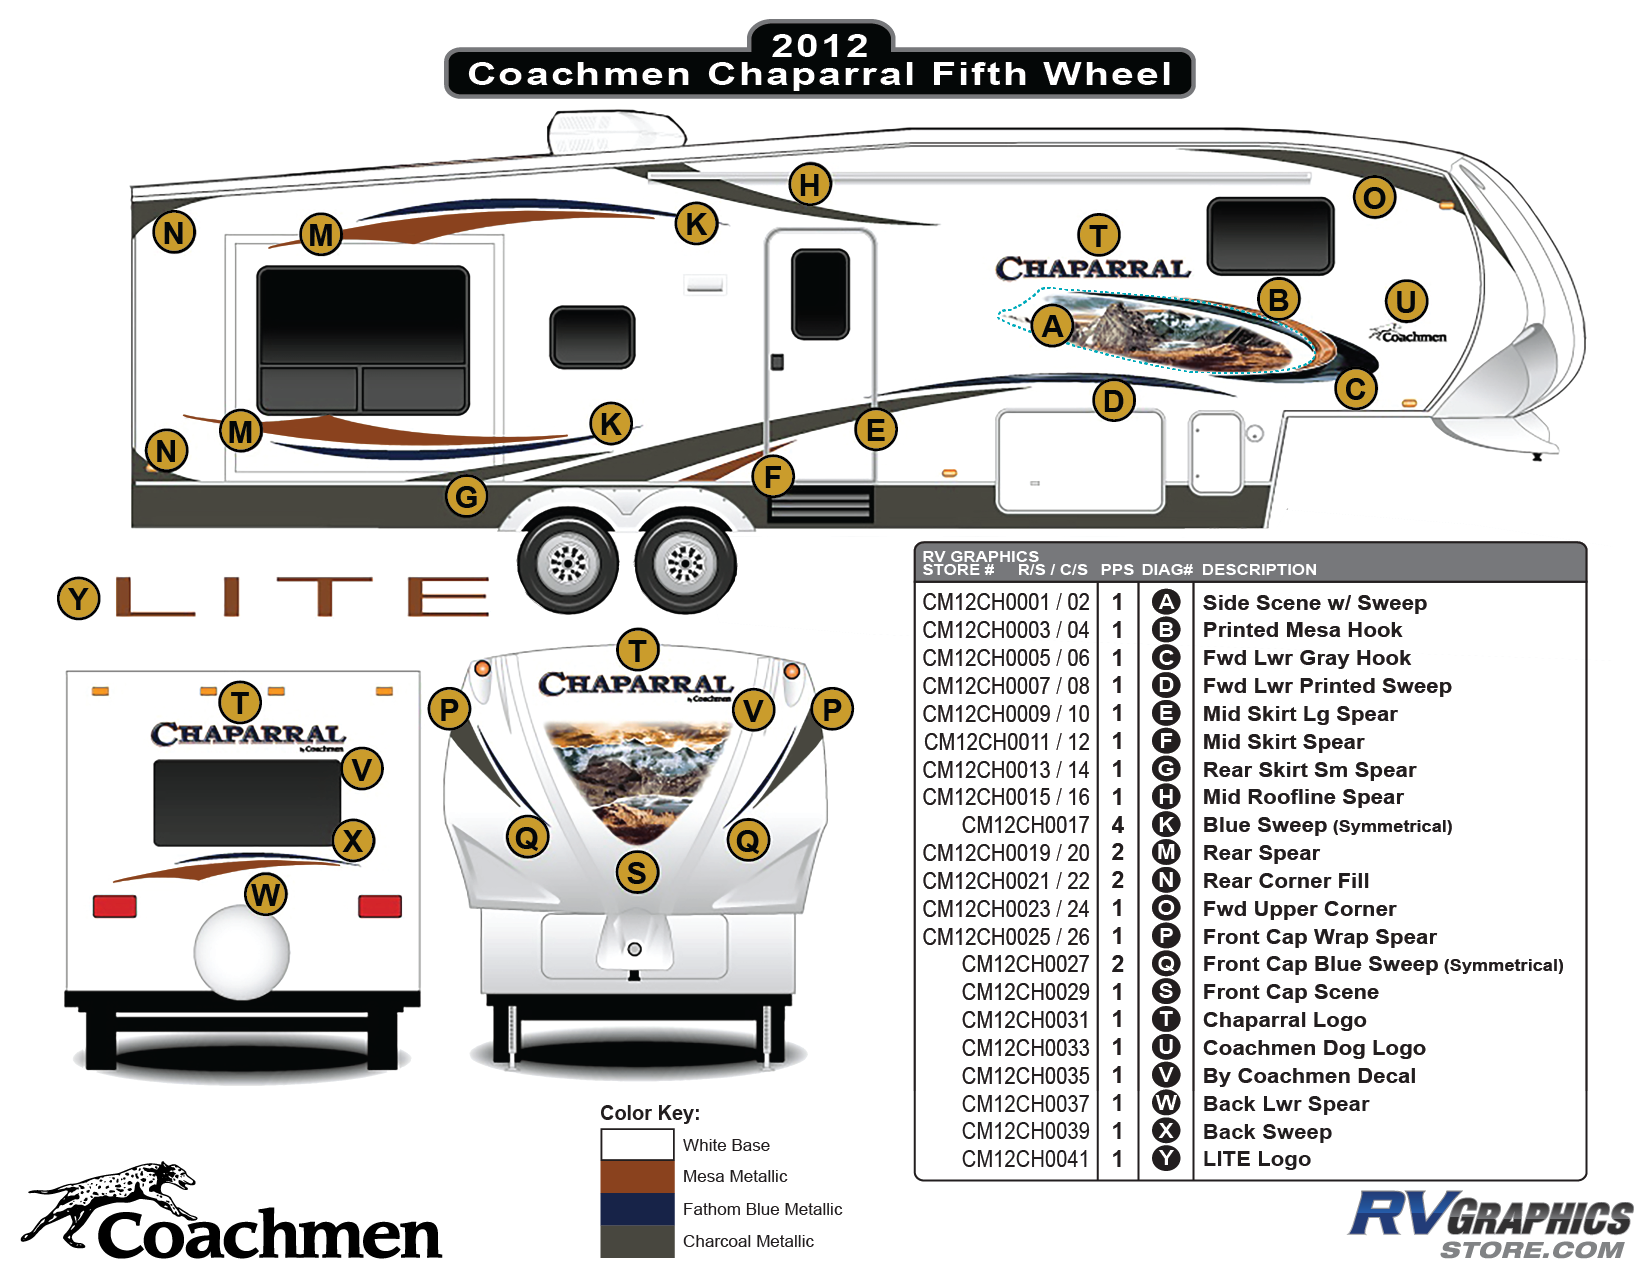 Chaparral - 2012 Chaparral FW Fifth Wheel